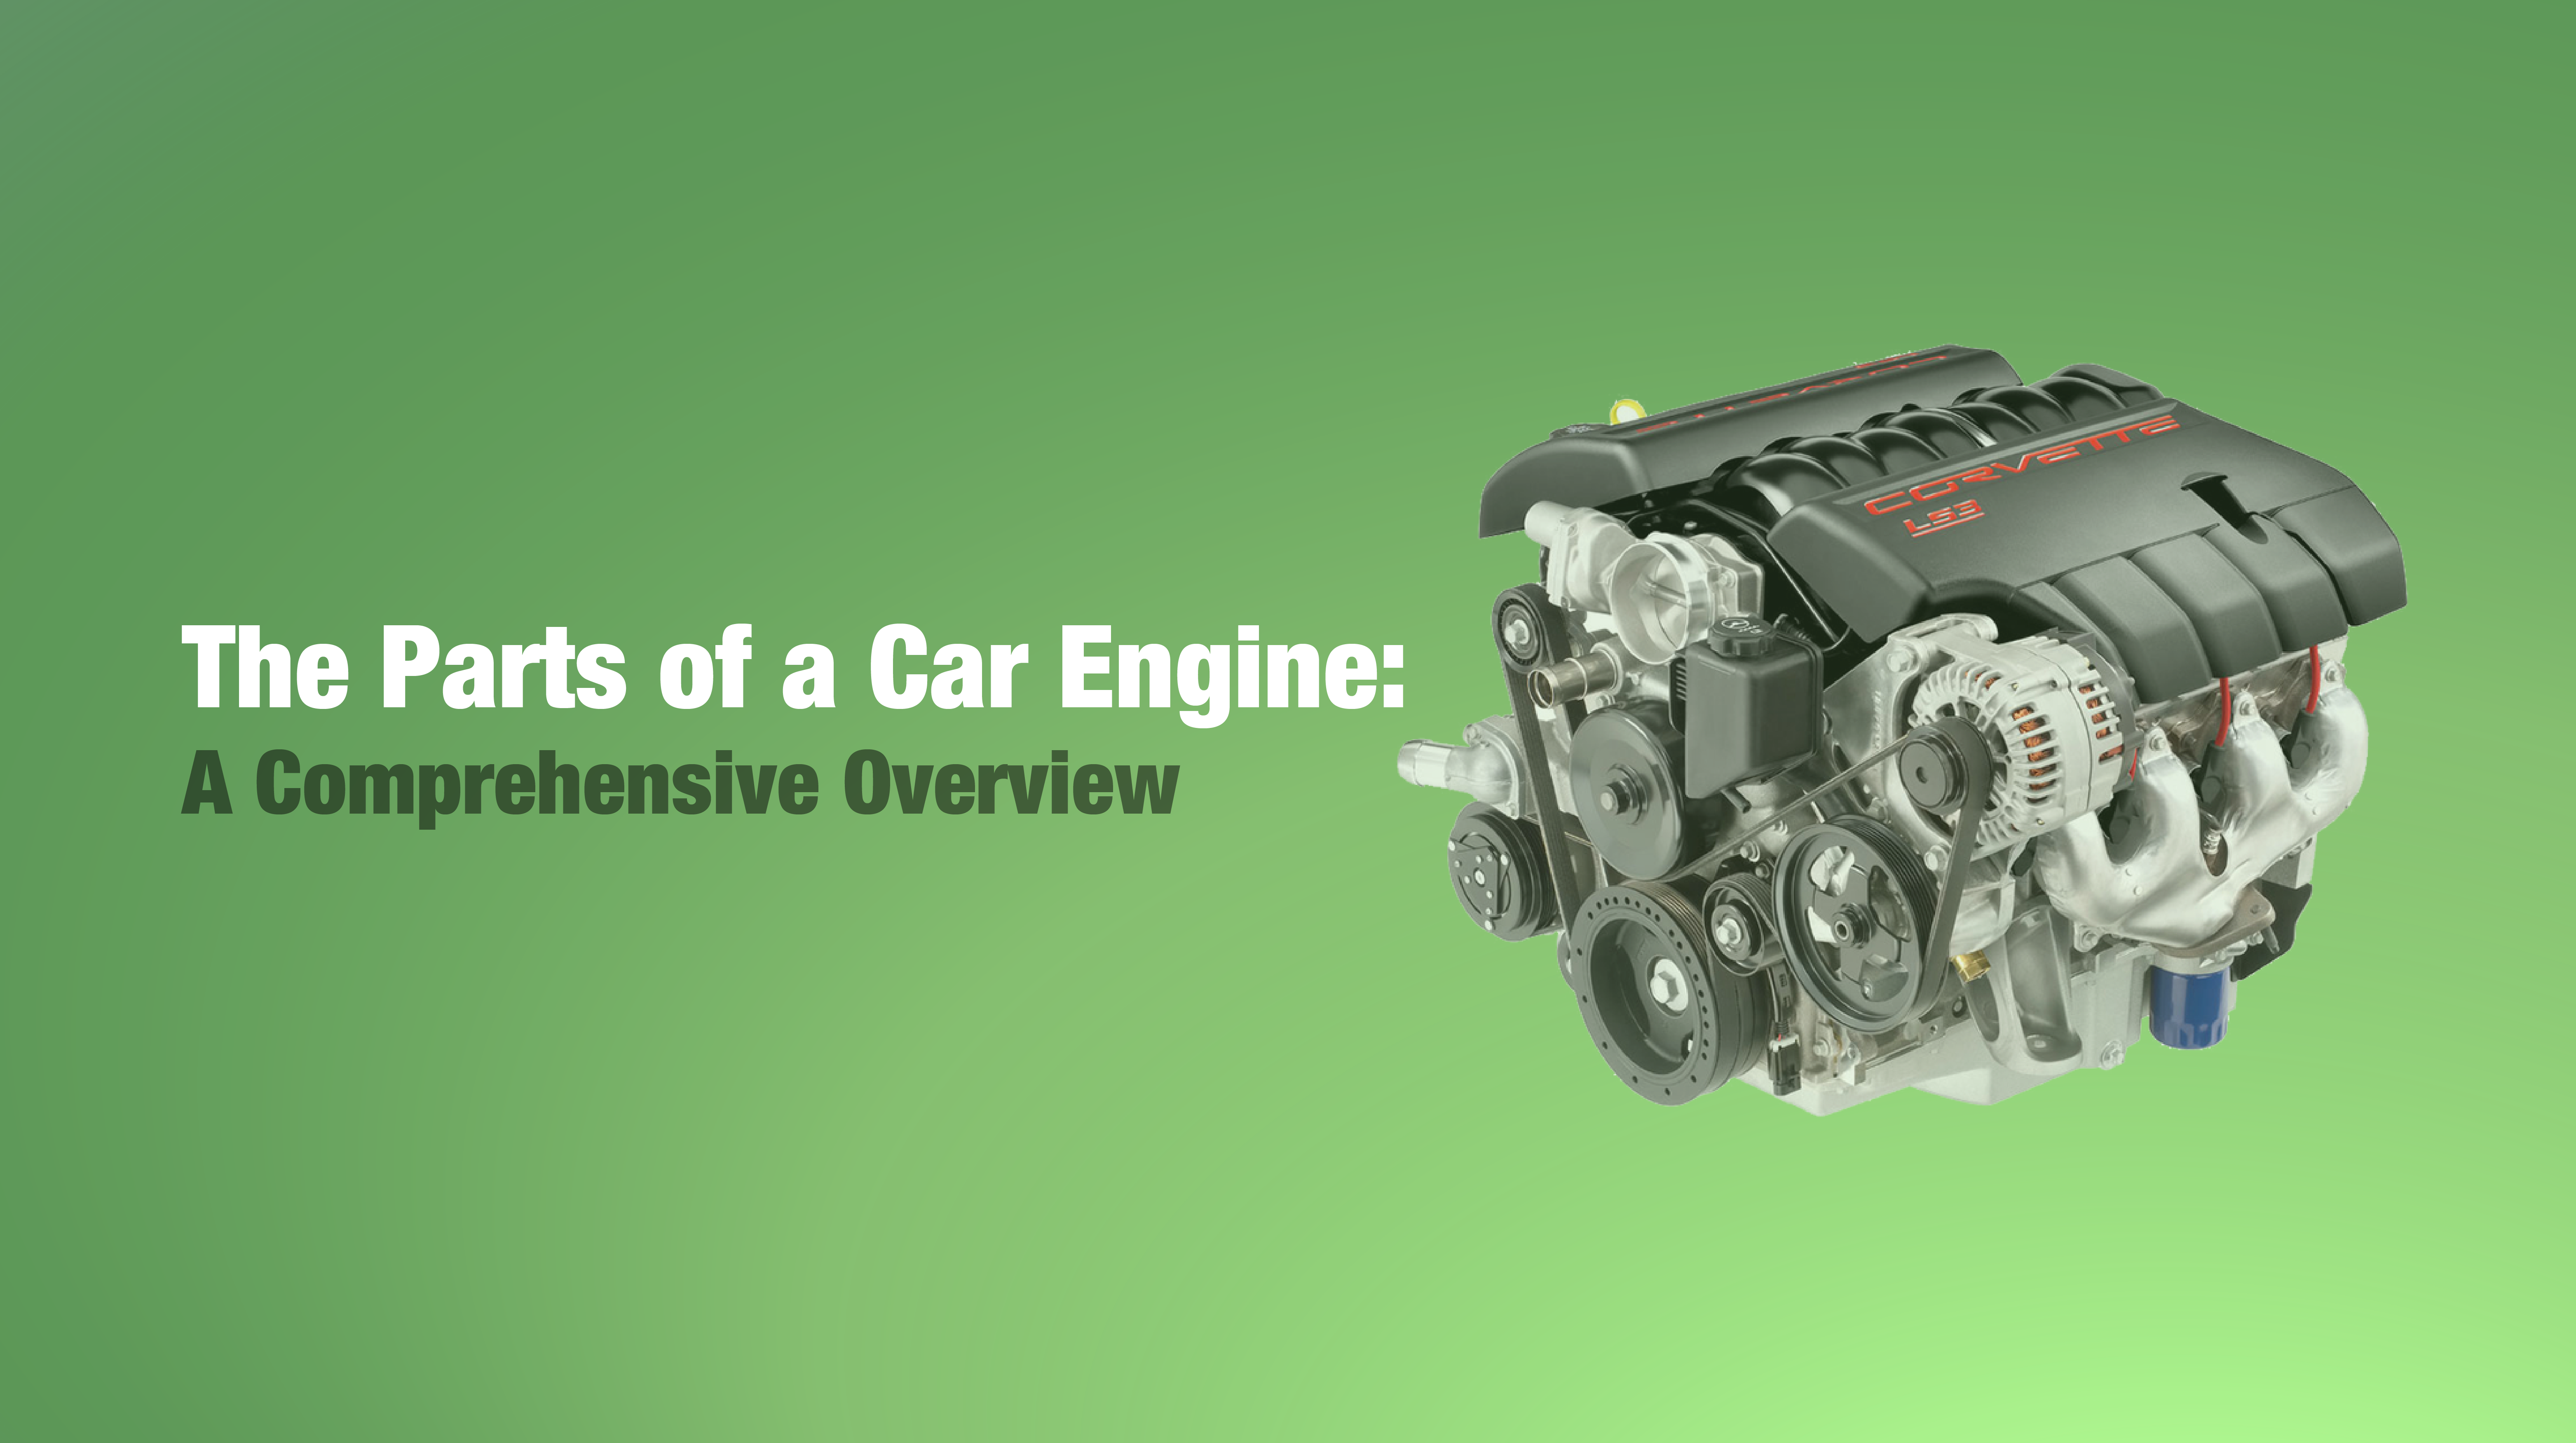 The Parts of a Car Engine: A Comprehensive Overview|car engine parts and their function|The Parts of a Car Engine: A Comprehensive Overview